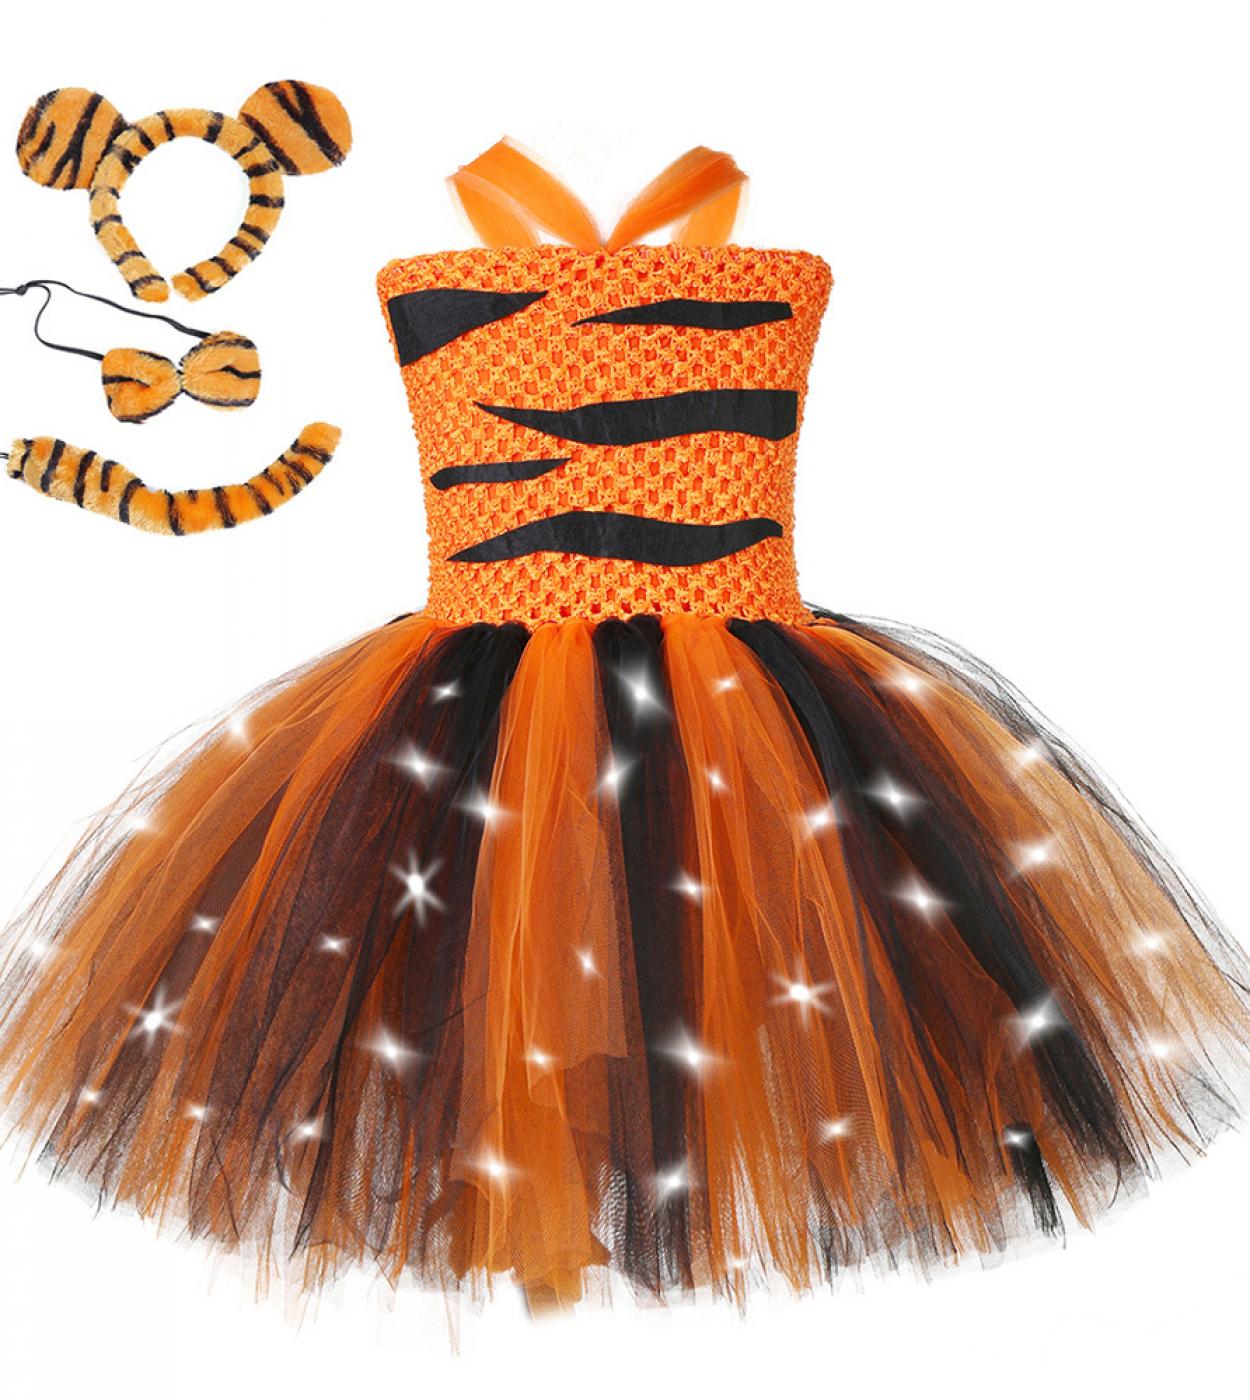 Led Light Tiger Costume For Girls Kids Animal Halloween Tutu Dress With Headband Tail Set Children Birthday Party Outfit